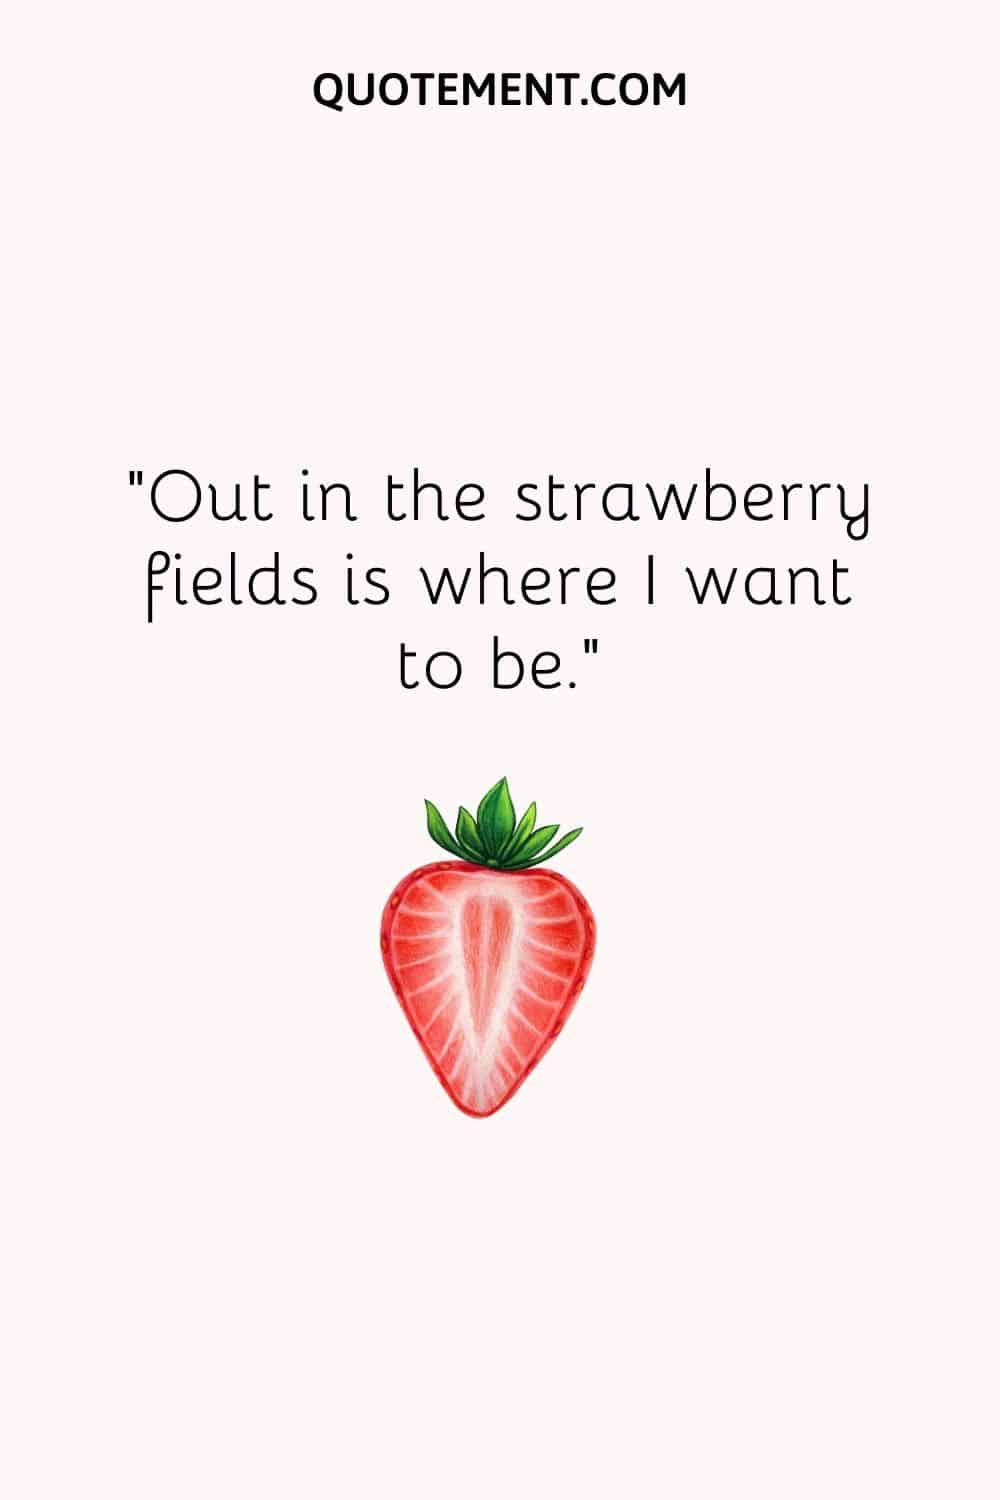 Out in the strawberry fields is where I want to be